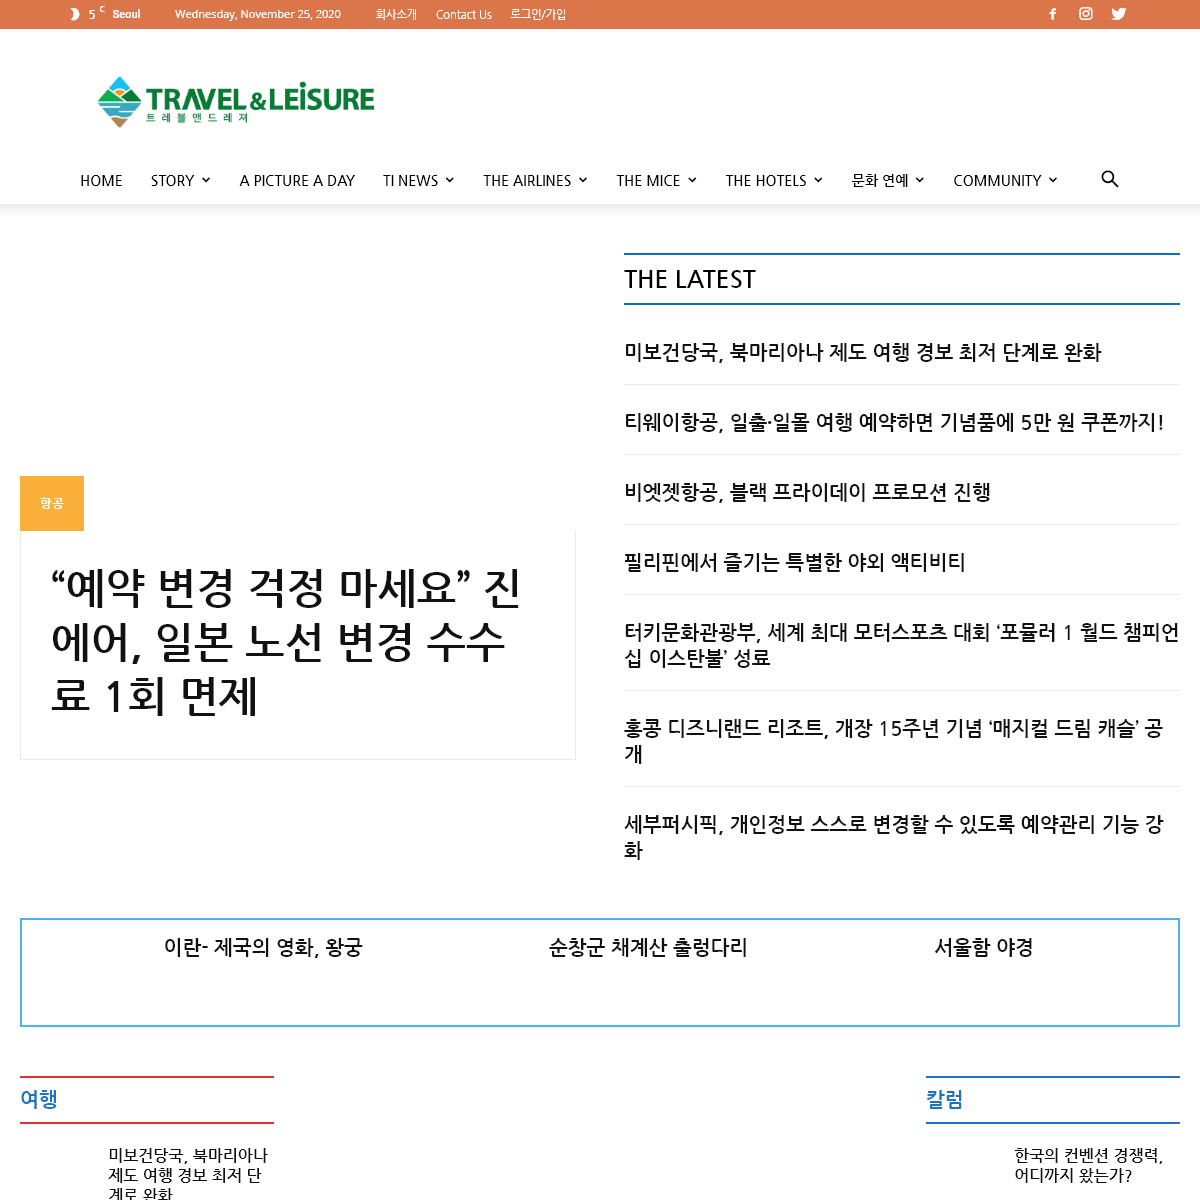 A complete backup of thetravelnews.co.kr